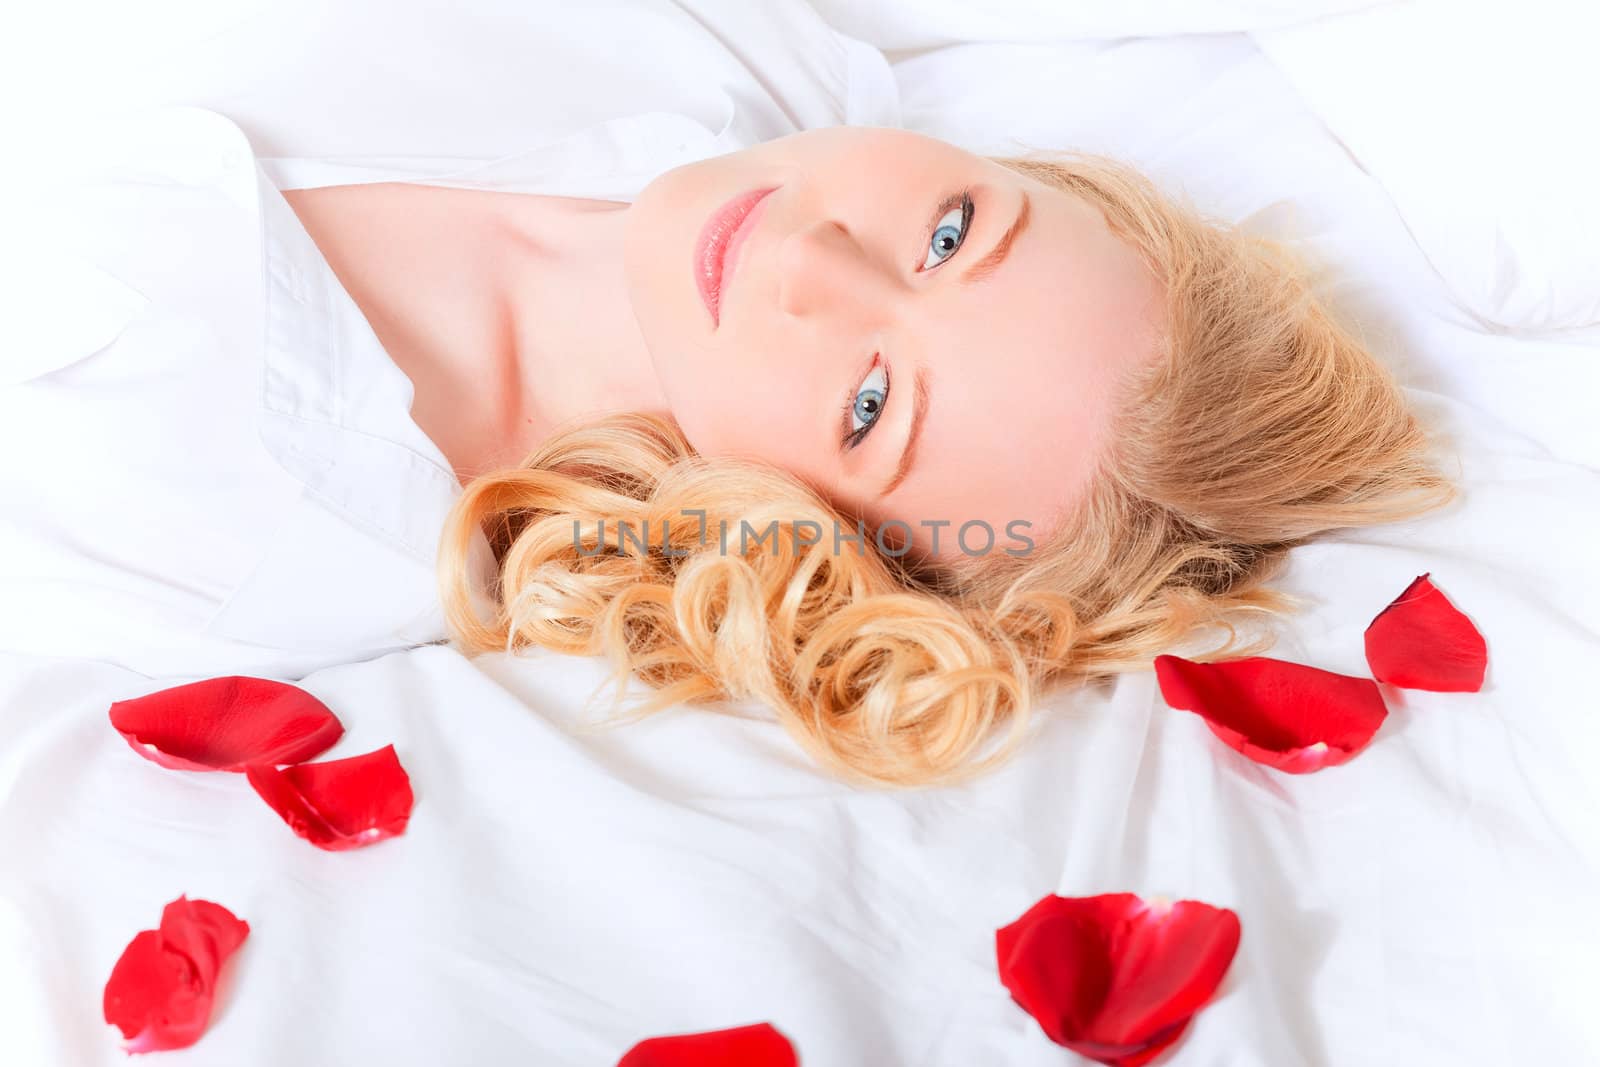 portrait of pretty woman laying in bed with rose petals